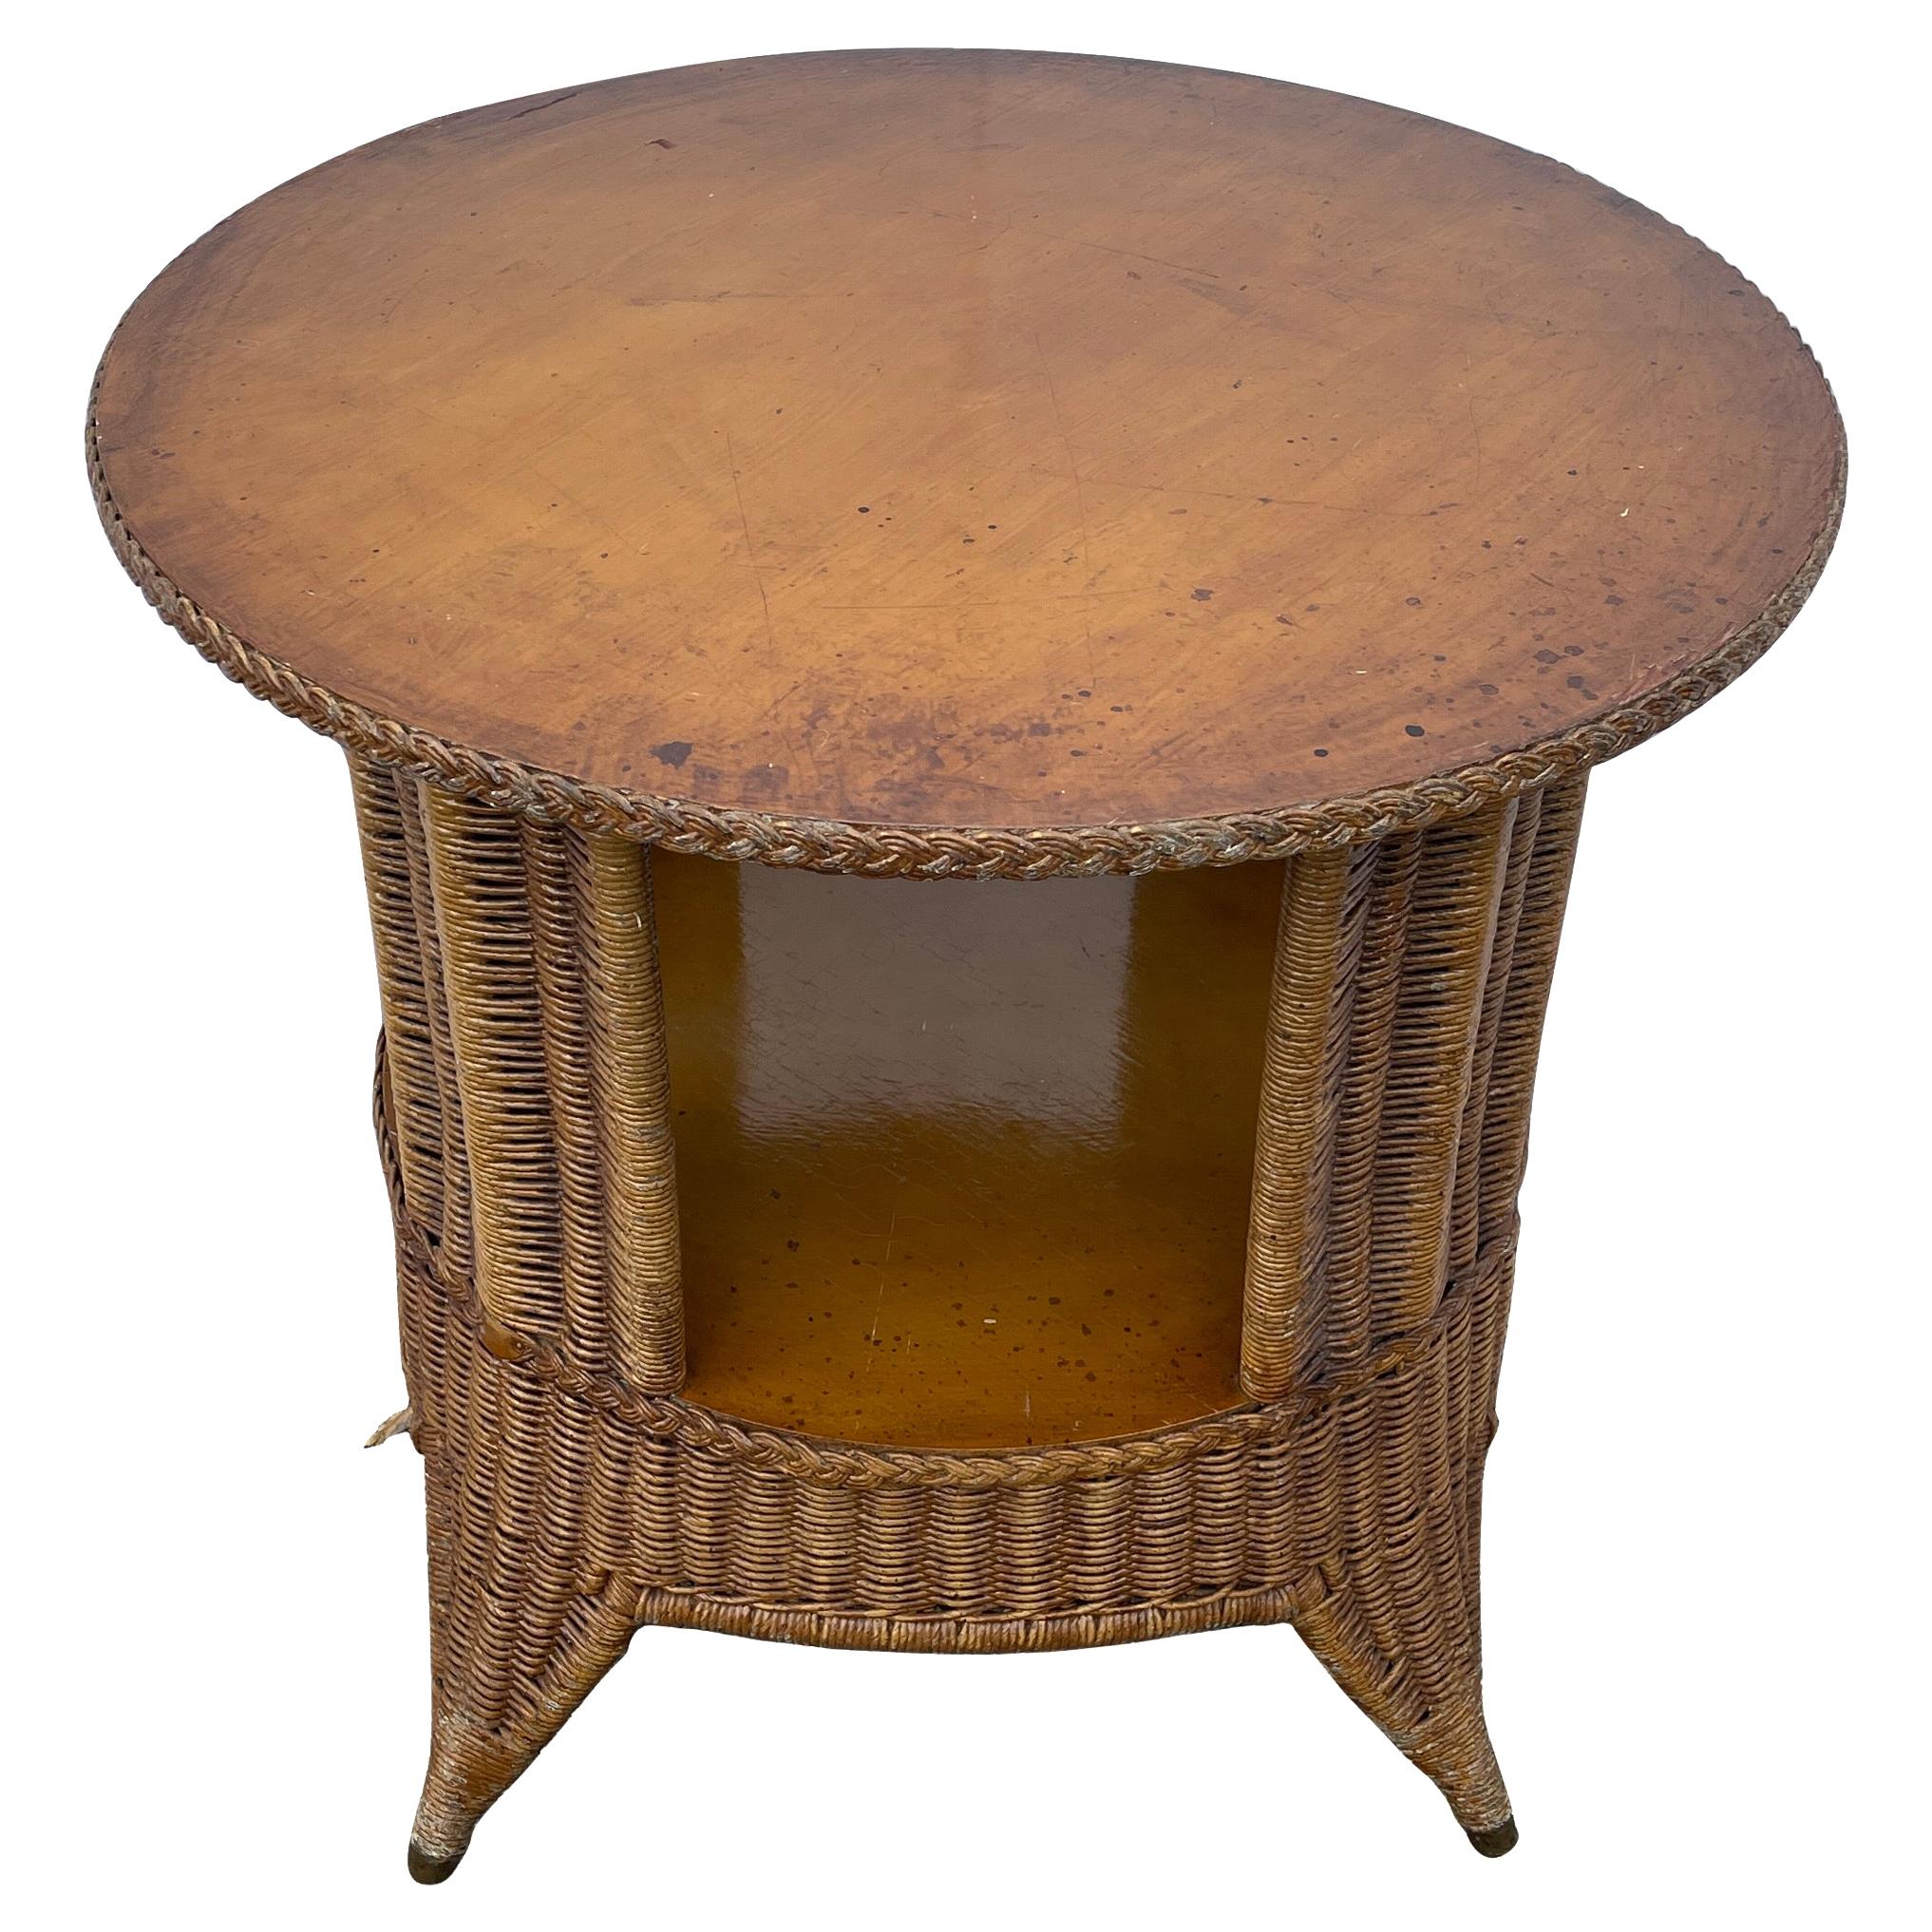 Mid-Century Modern Wicker and Wood Round Side Table